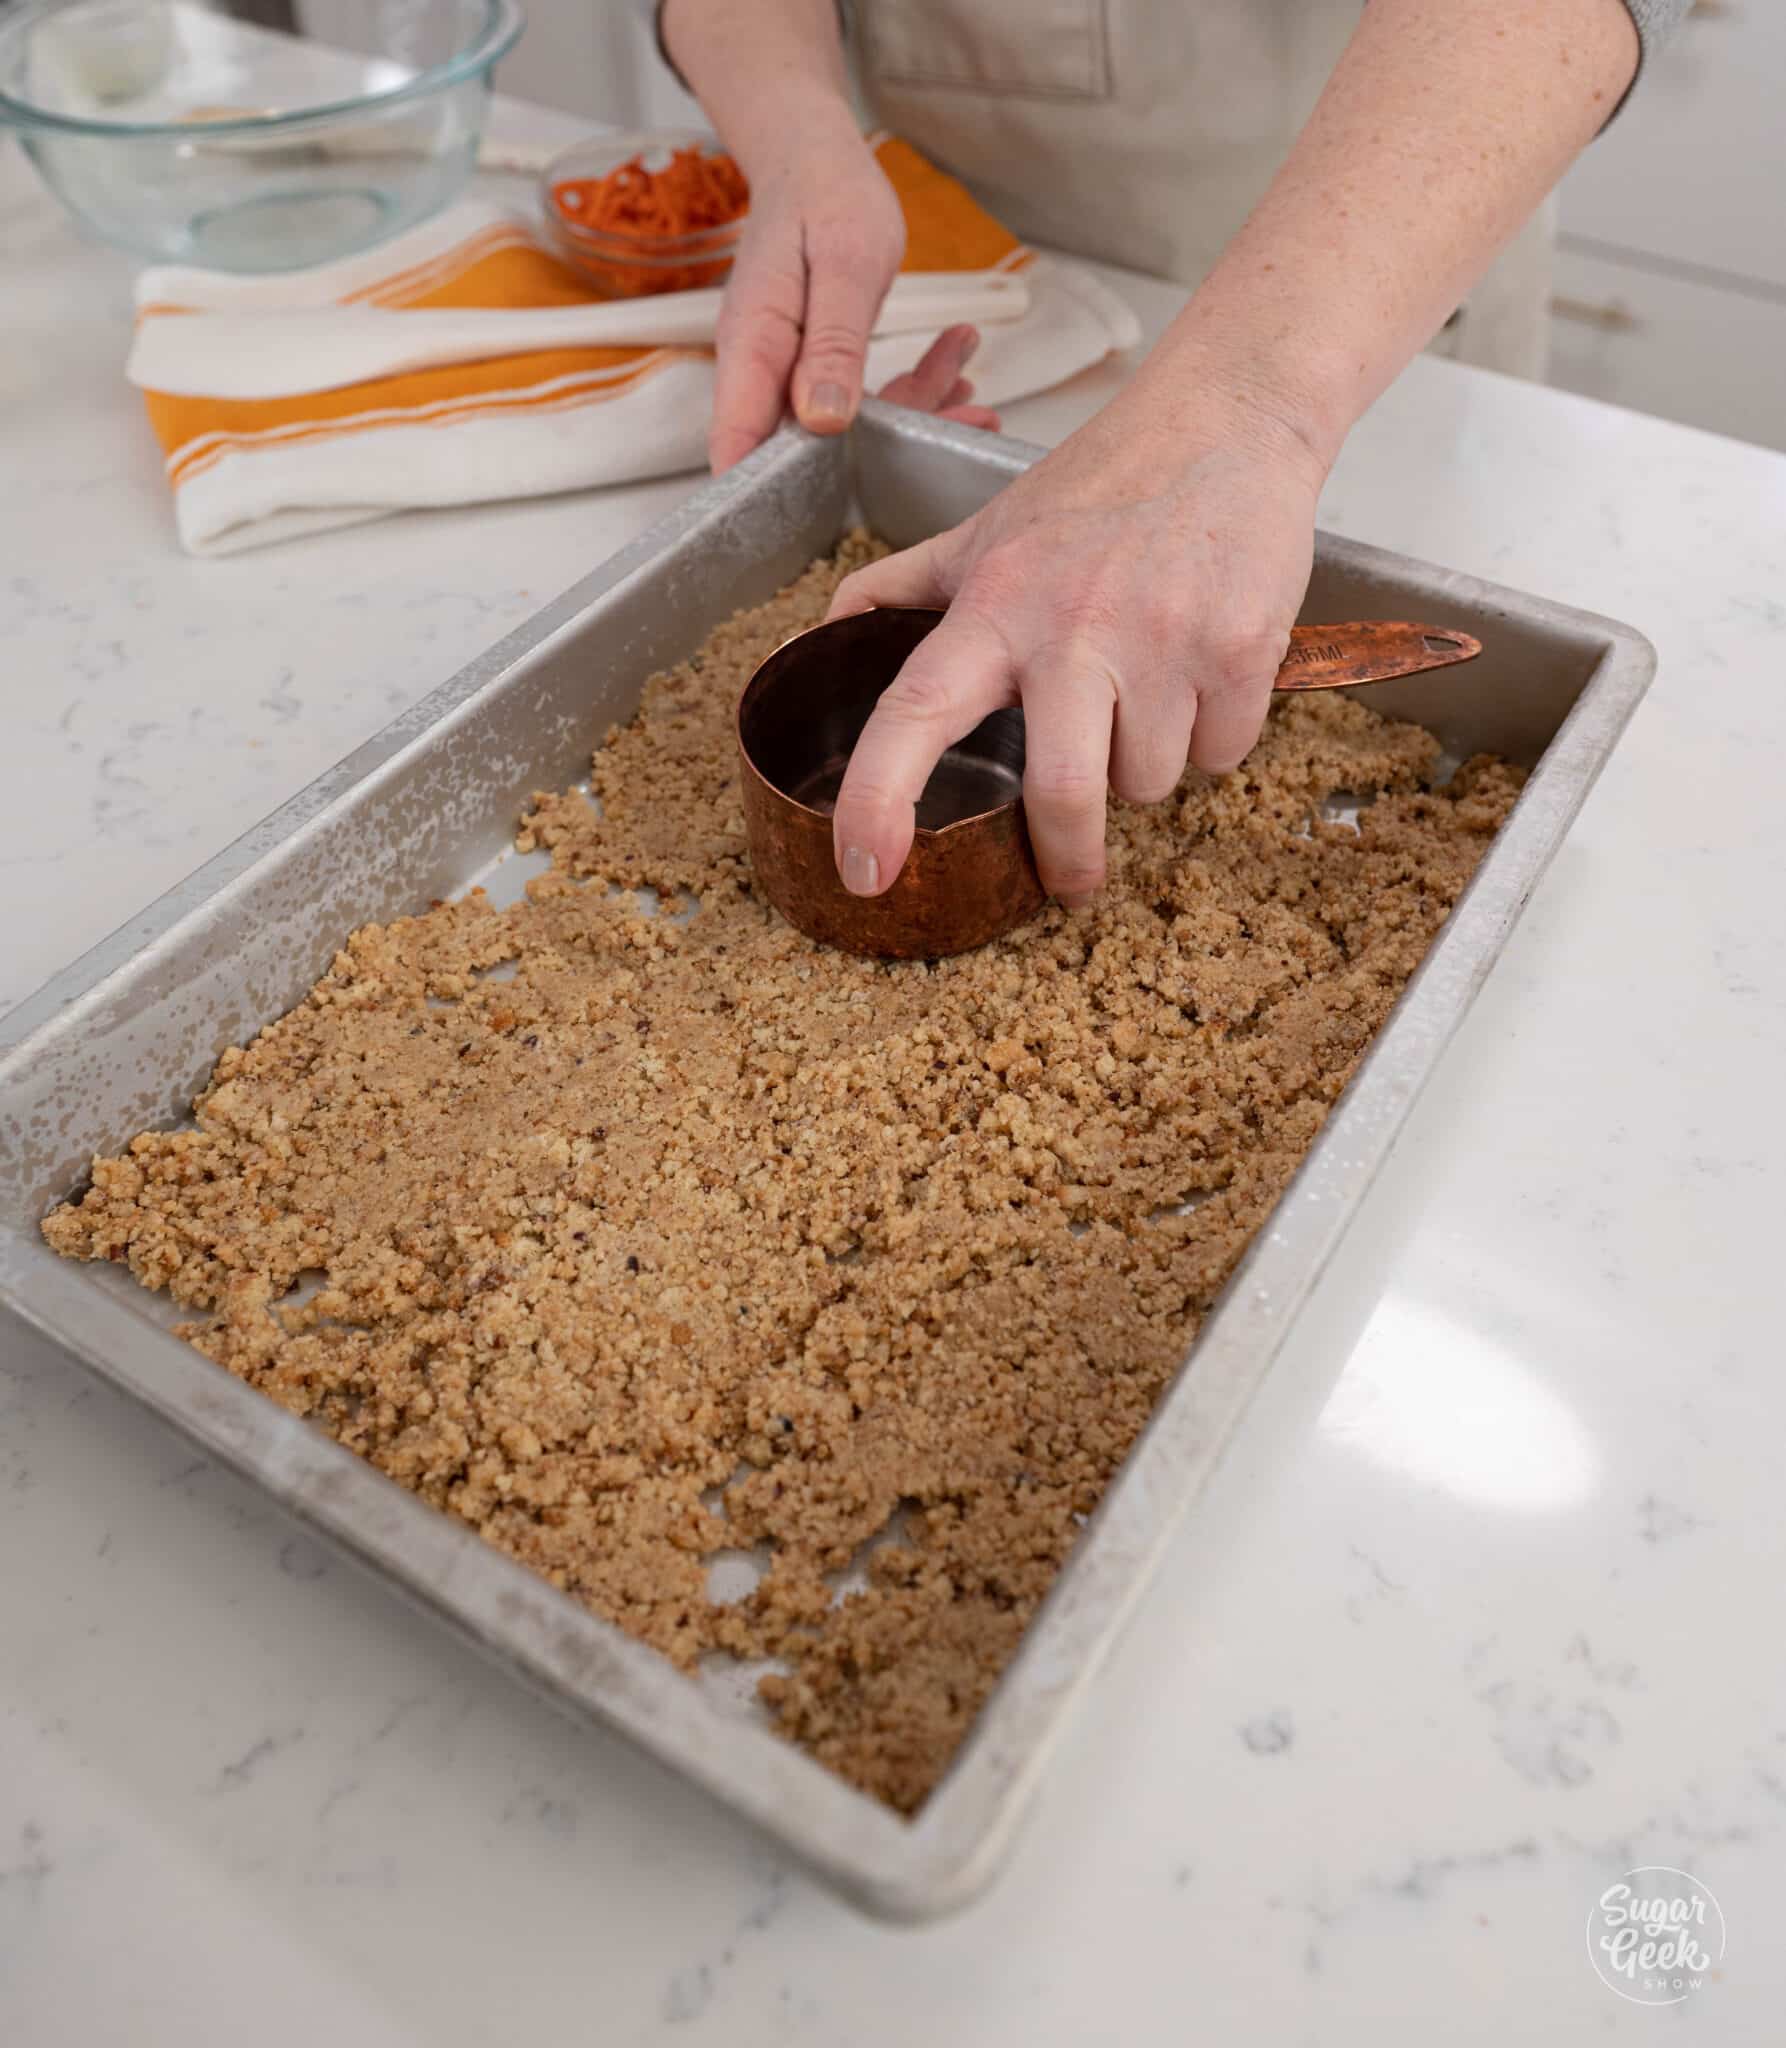 Pressing crust into a baking pan